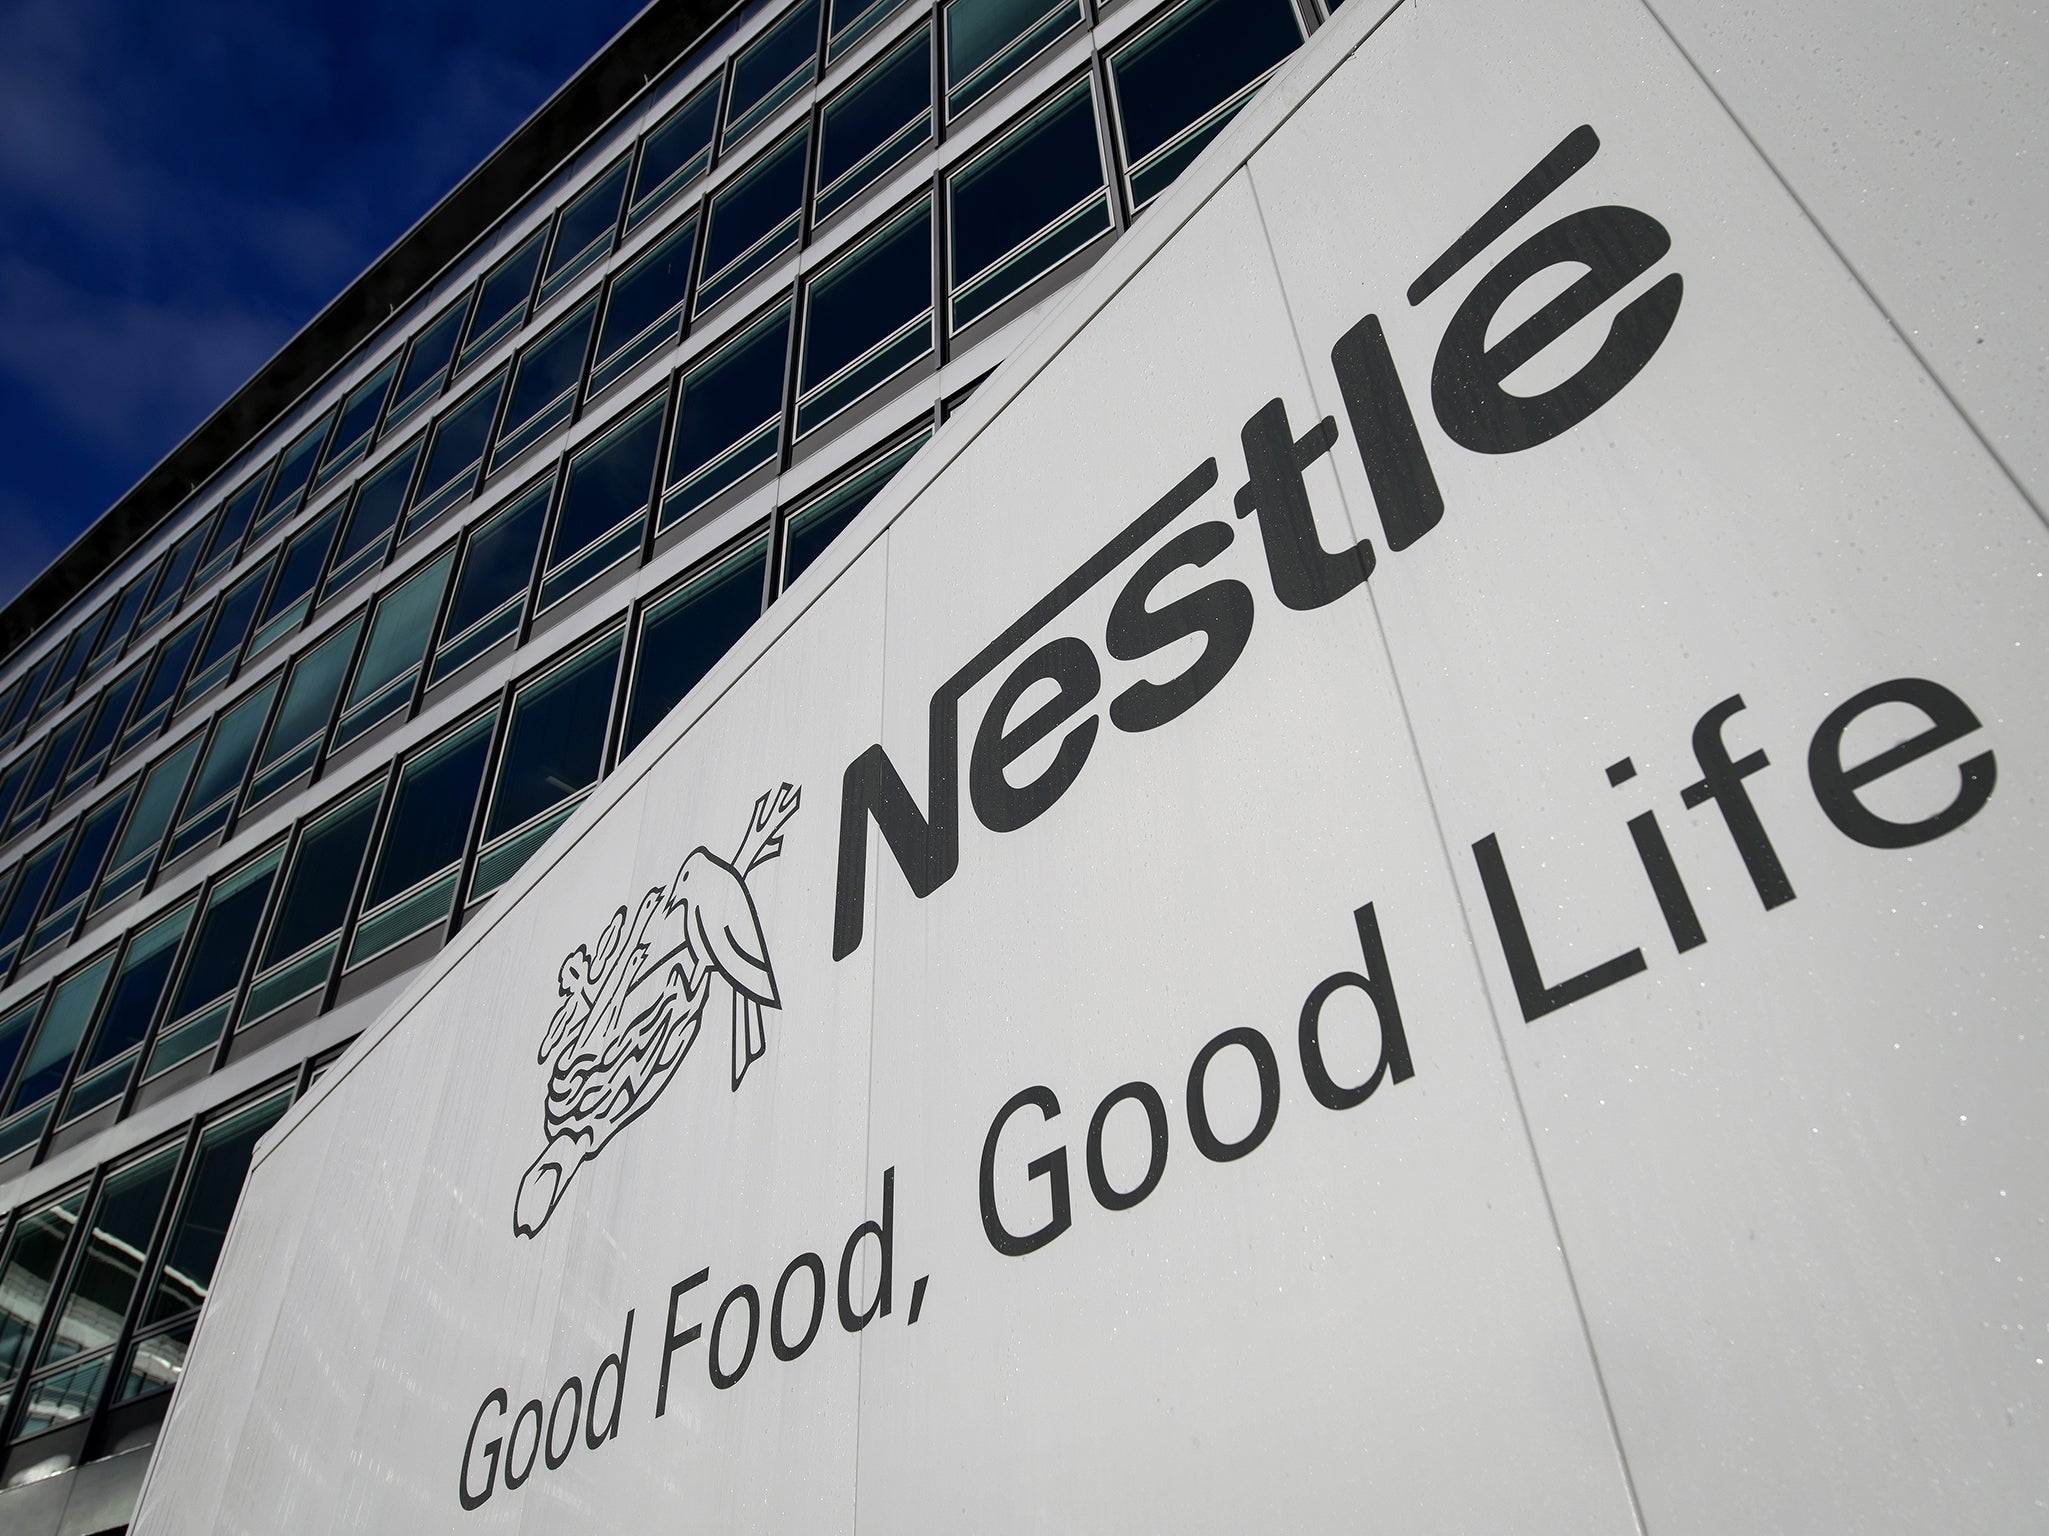 Nestlé hopes to succeed where others have failed and identify “natural substances” that can stimulate an enzyme in our body